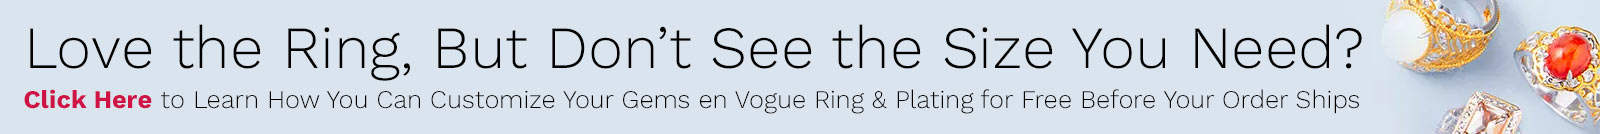 Click Here to Learn How You Can Customize Your Gems en Vouge Ring & Plating for Free Before Your Order Ships